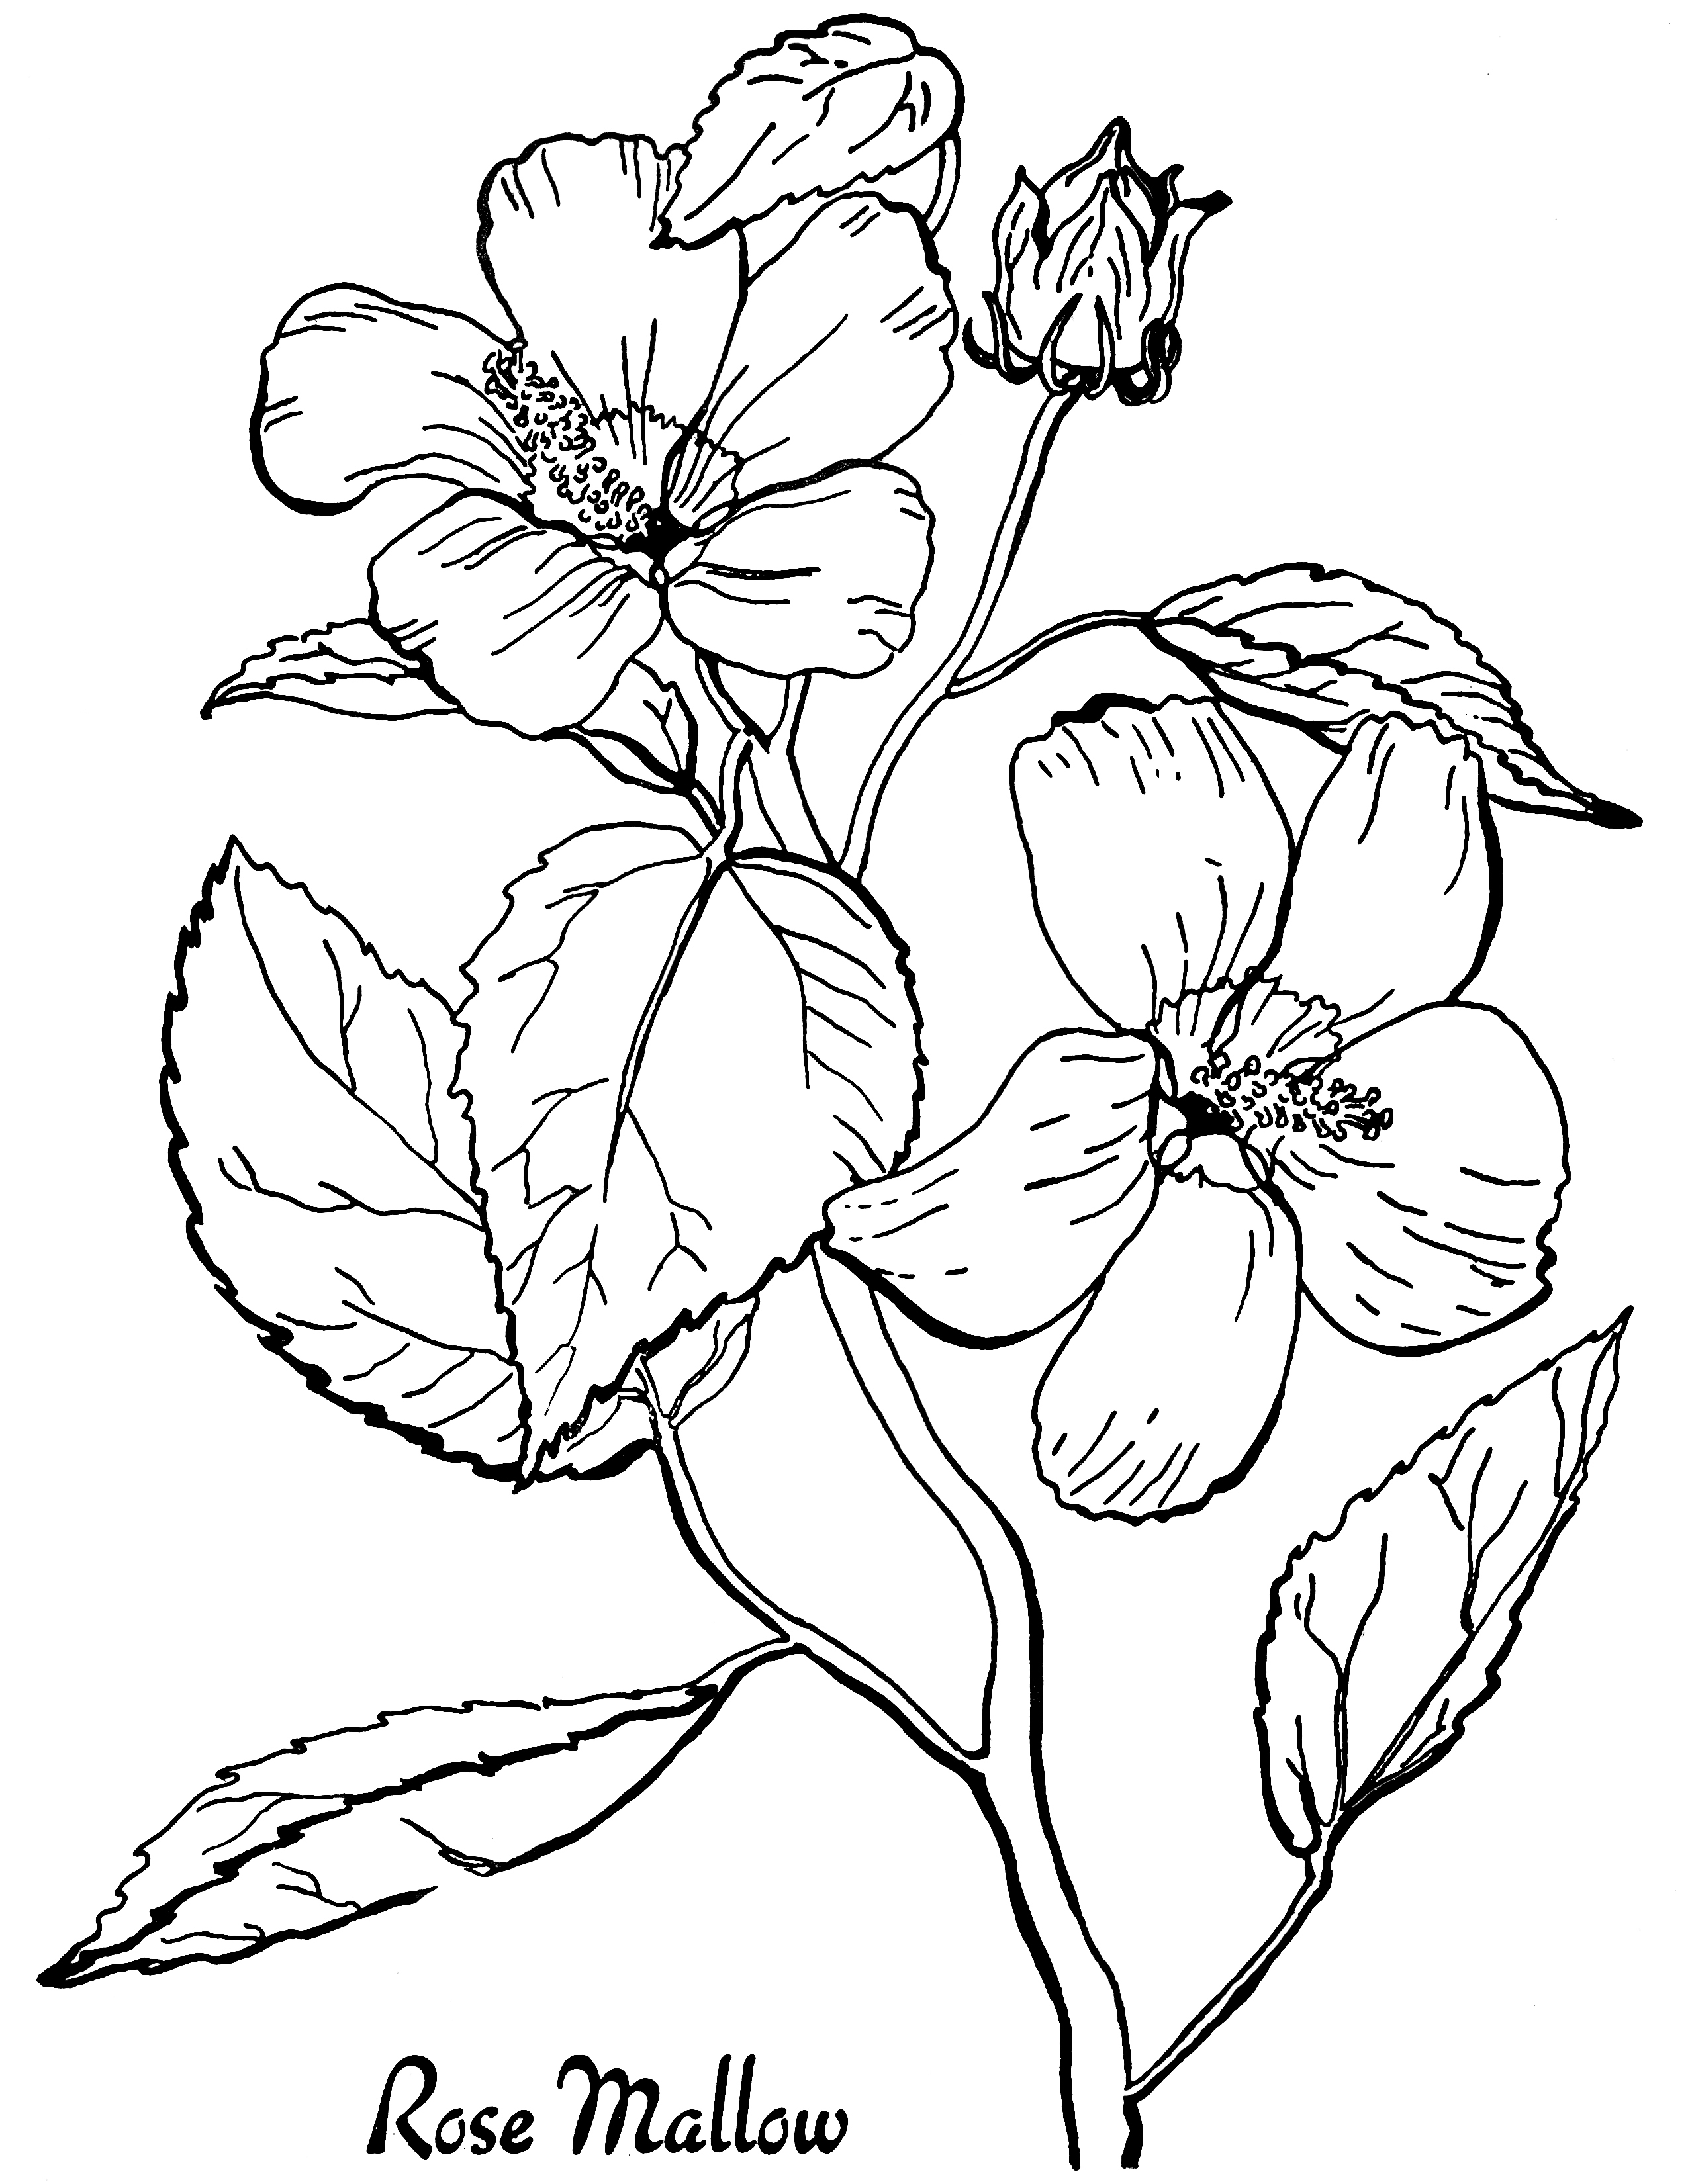 Free Roses Printable Adult Coloring Page - The Graphics Fairy